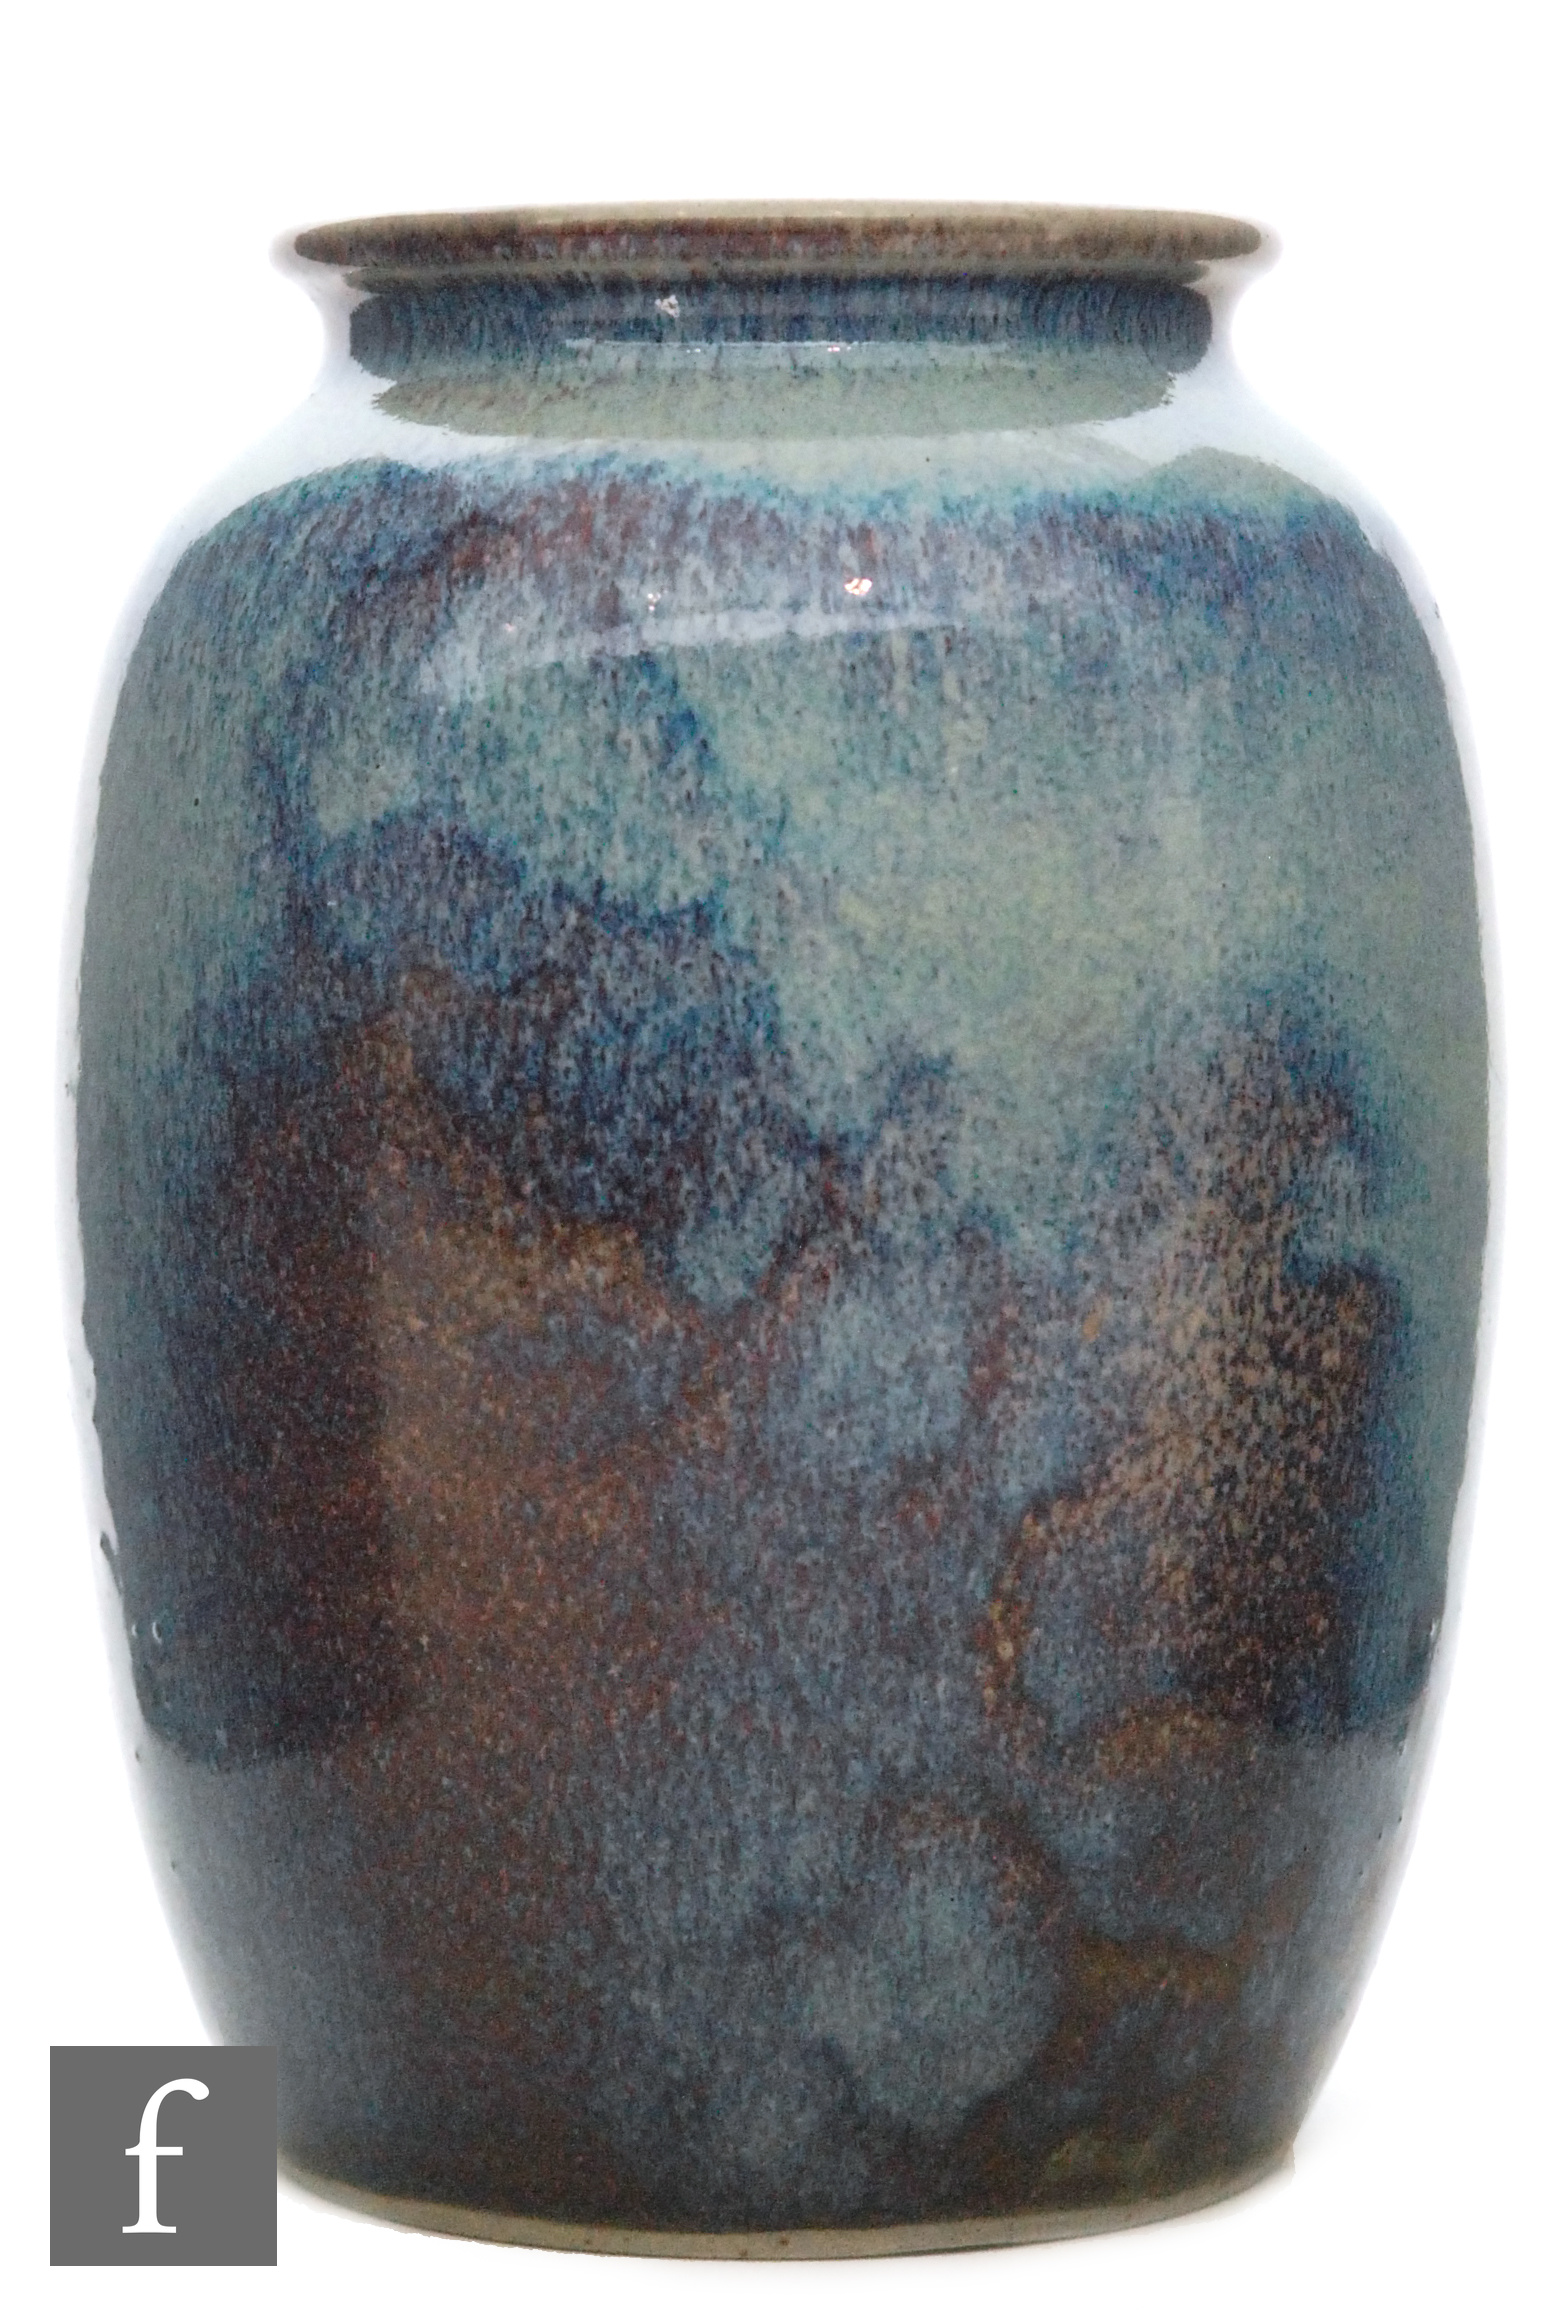 Ruskin Pottery - A high fired vase of barrel form with a roll rim neck decorated in a mottled green